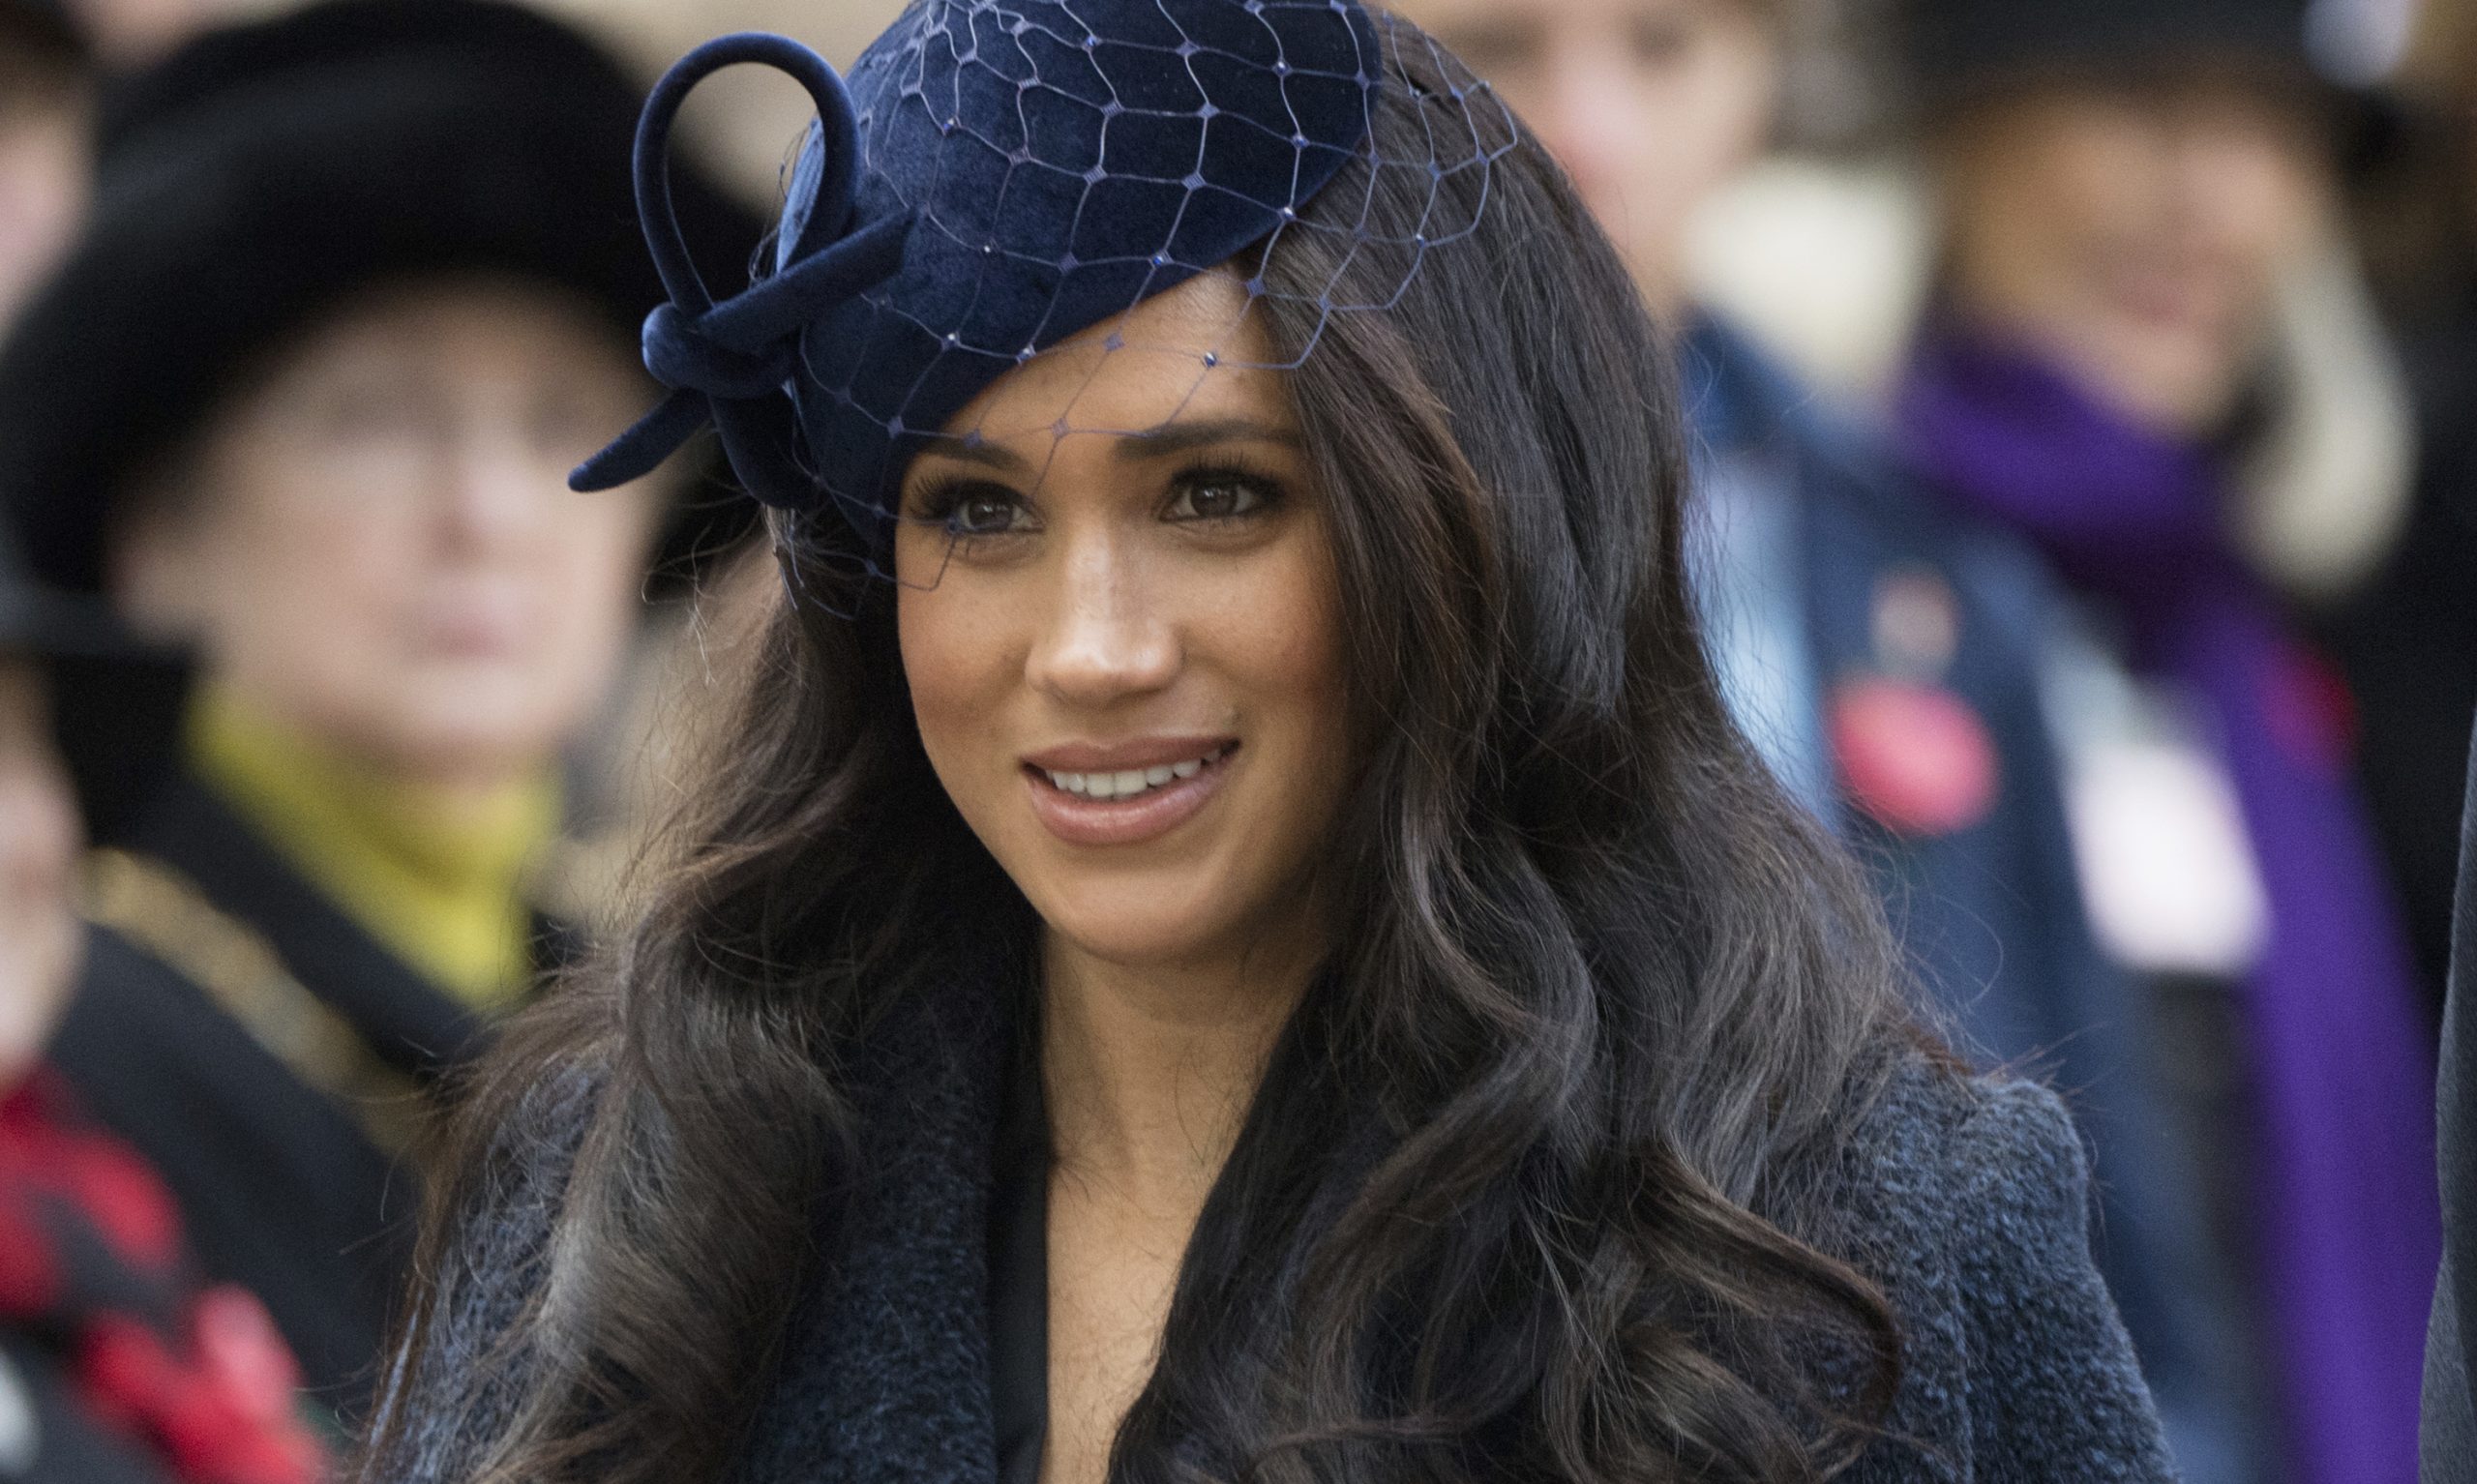 High street versions of royal hats from £9.50